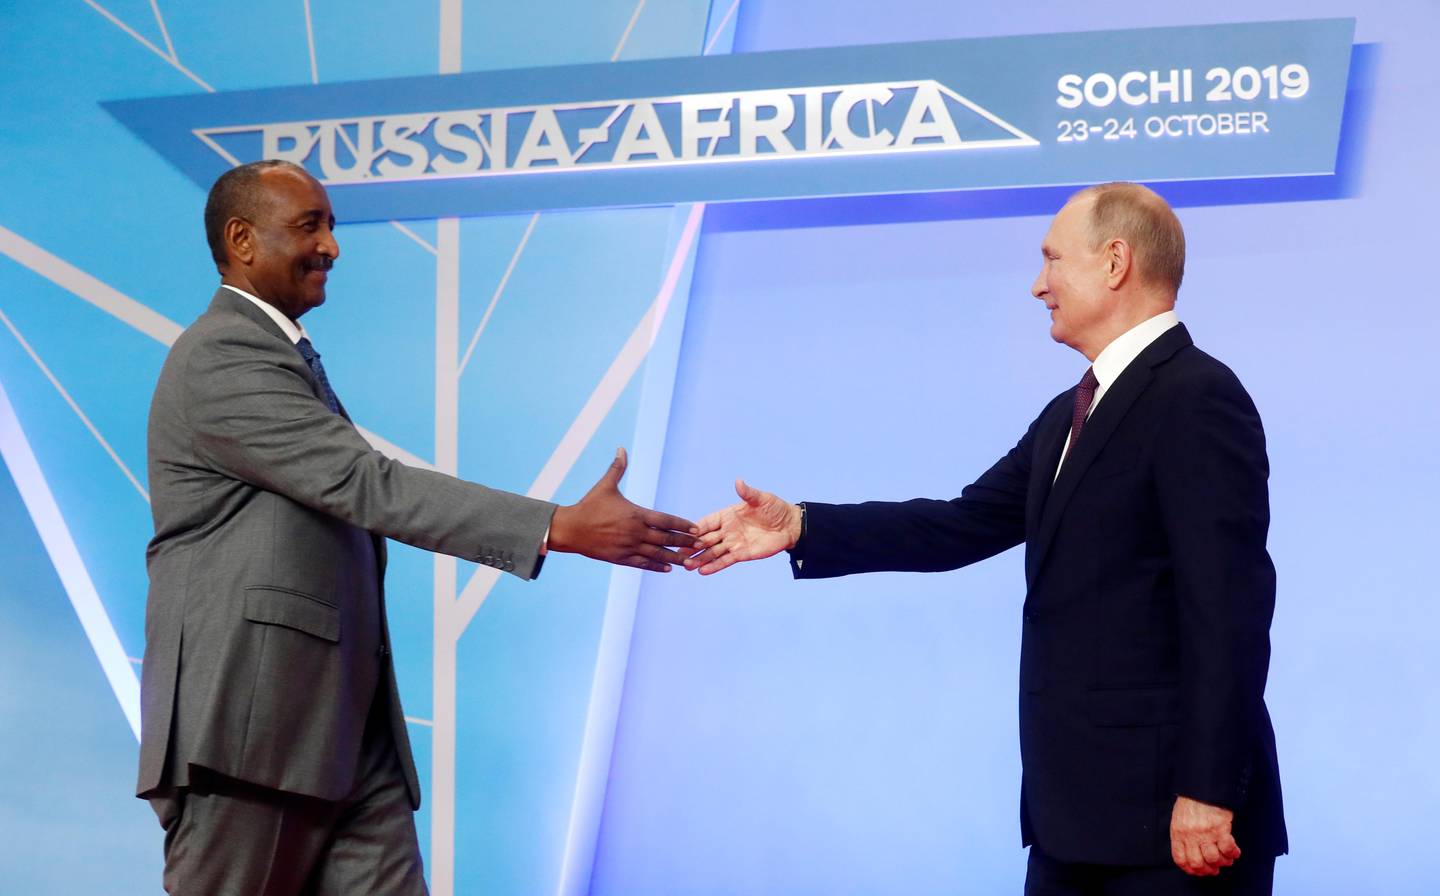 Russian President Vladimir Putin, right, greets President of the Sovereignty Council of Sudan Abdel Fattah Abdelrahman Burhan during a welcome ceremony of the Russia-Africa summit in the Black Sea resort of Sochi, Russia, Wednesday, Oct. 23, 2019. (AP Photo/Sergei Chirikov, pool photo via AP)